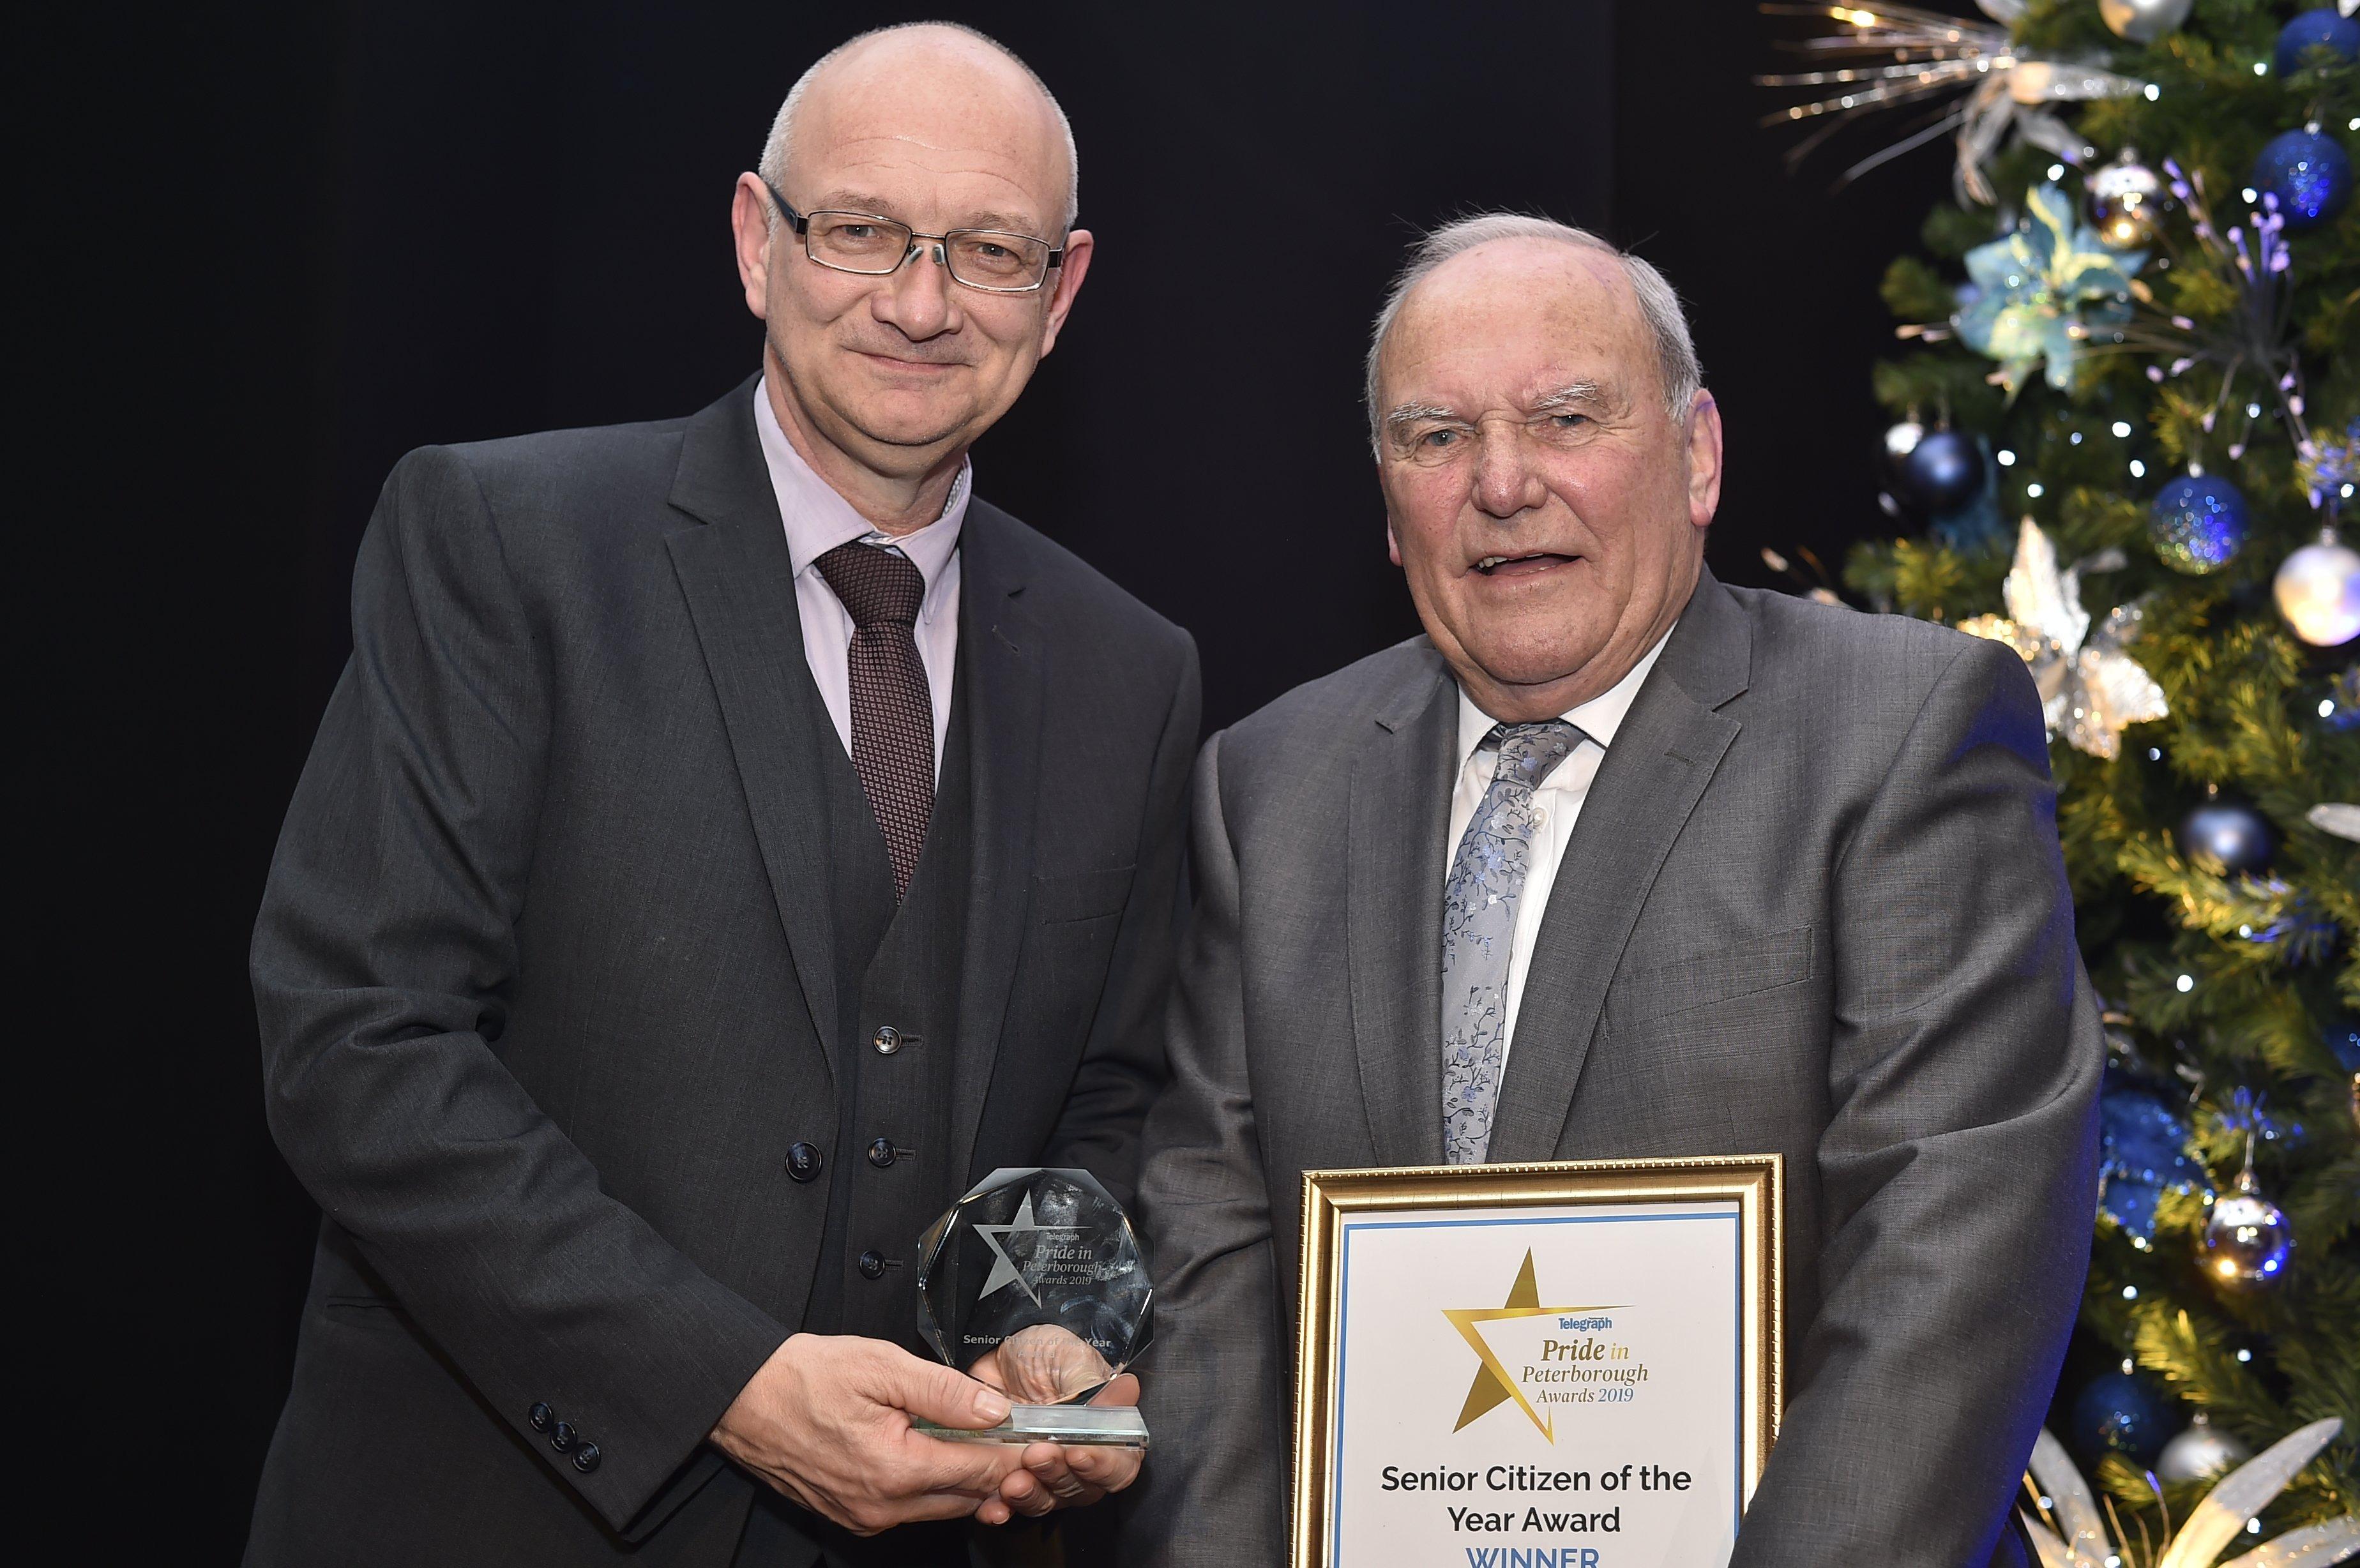 Peterborough Telegraph Pride in Peterborough Awards 2019.    Senior Citizen of the Year award winner Tommy Robson with Mark Edwards EMN-191012-002412009